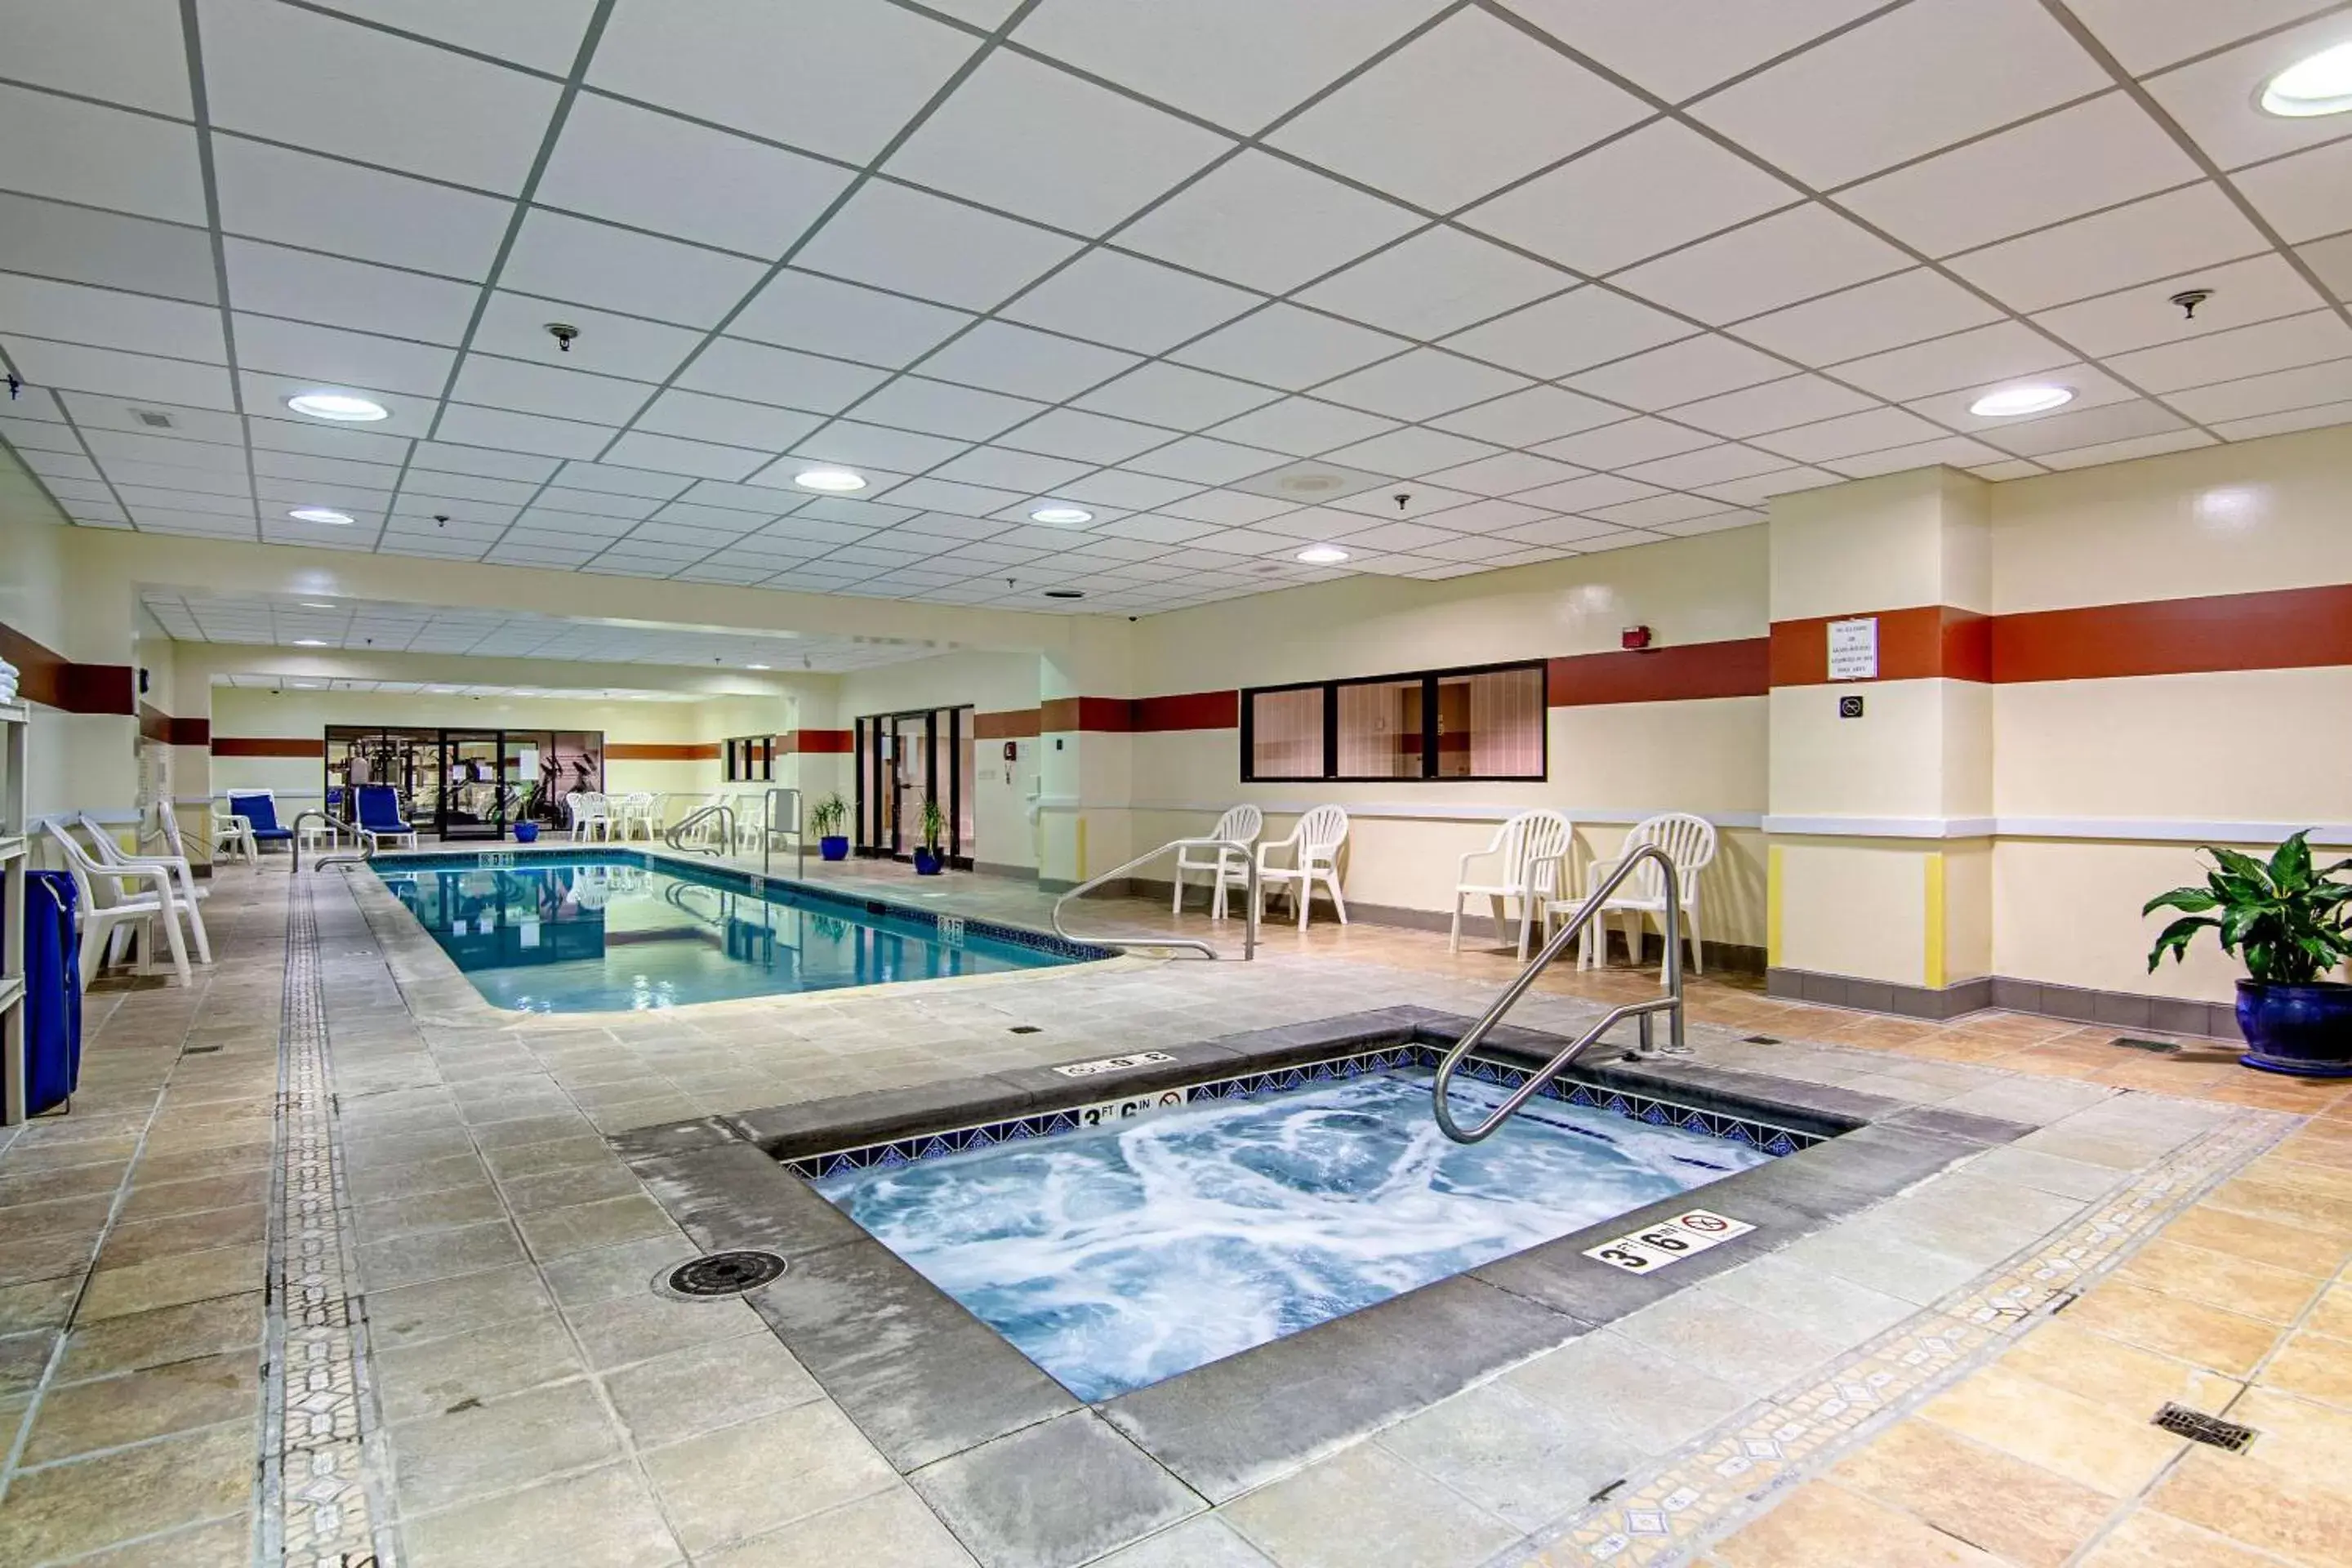 On site, Swimming Pool in Quality Inn Portsmouth